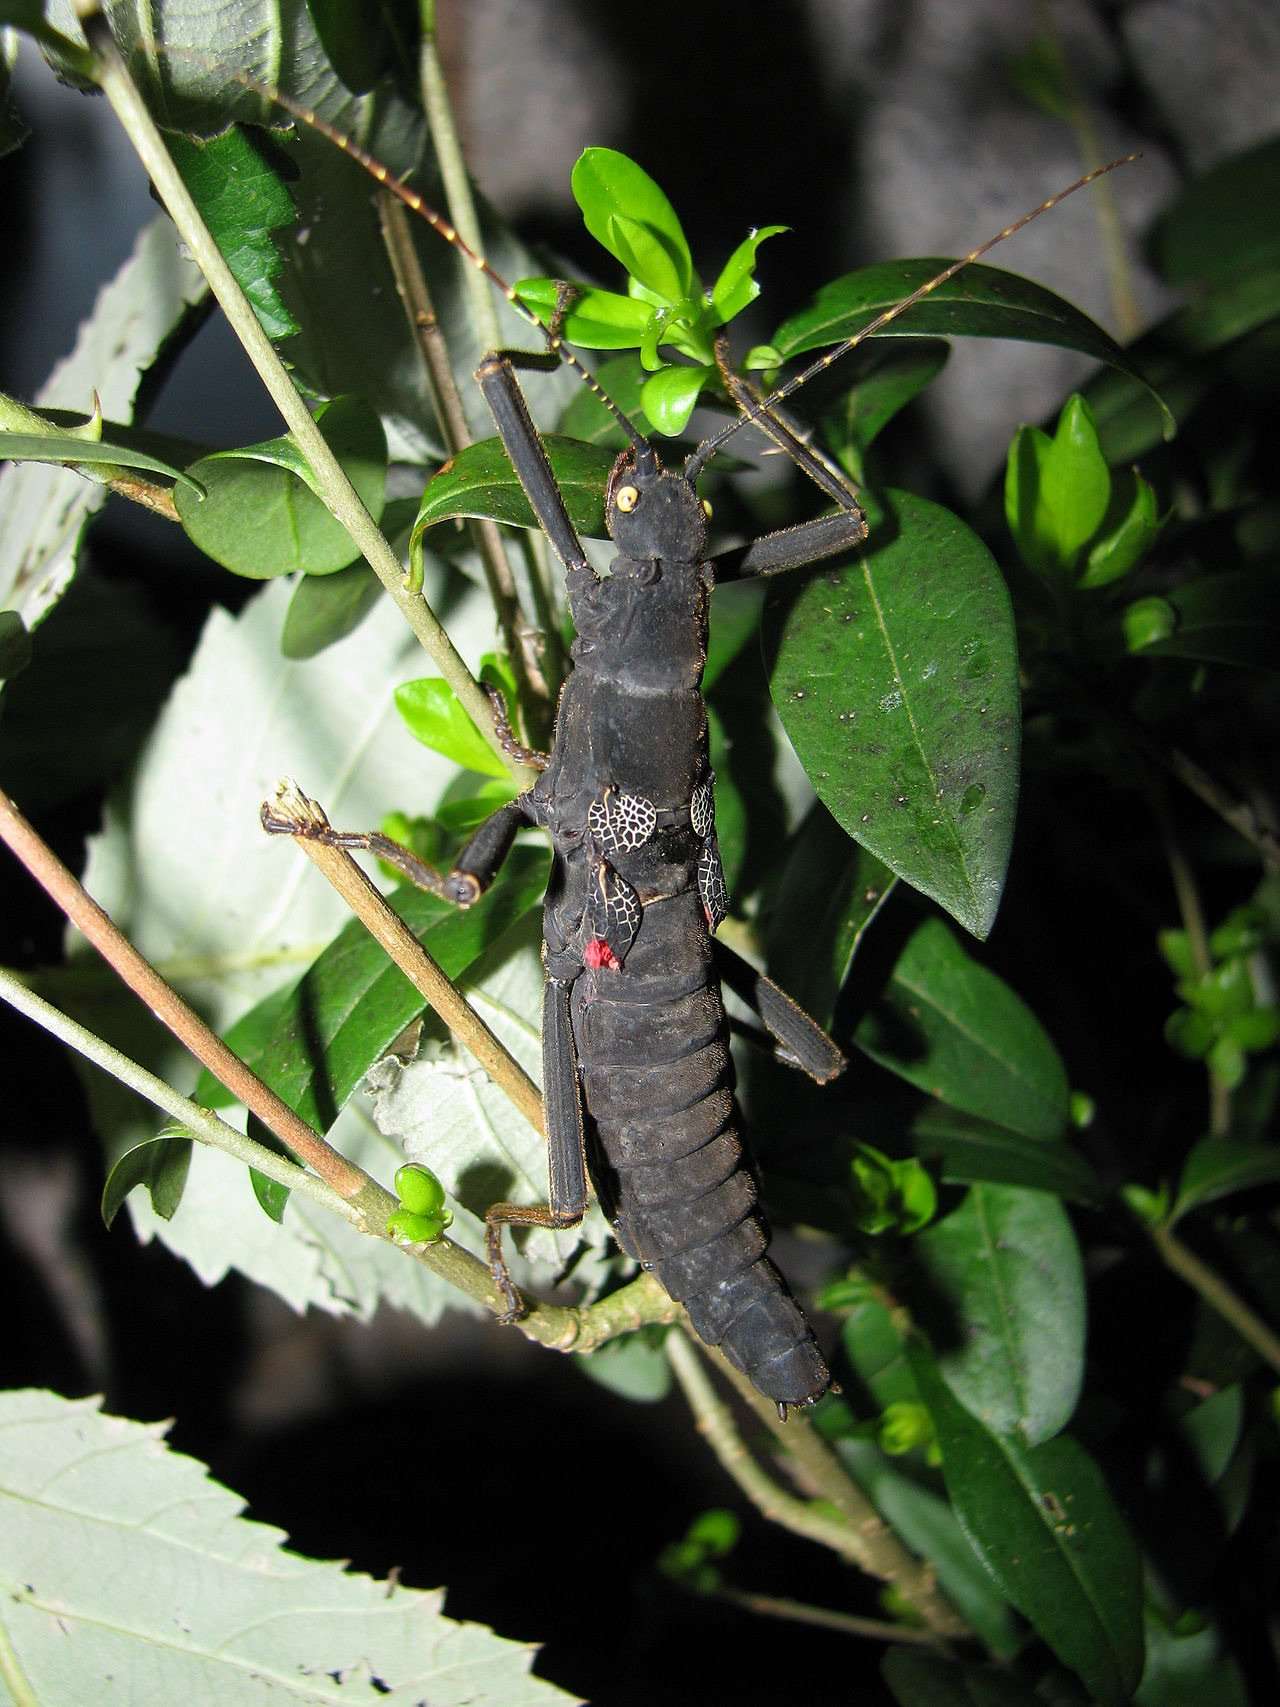 black_beauty”_peruphasma_schultei__stick_insect_nymphs